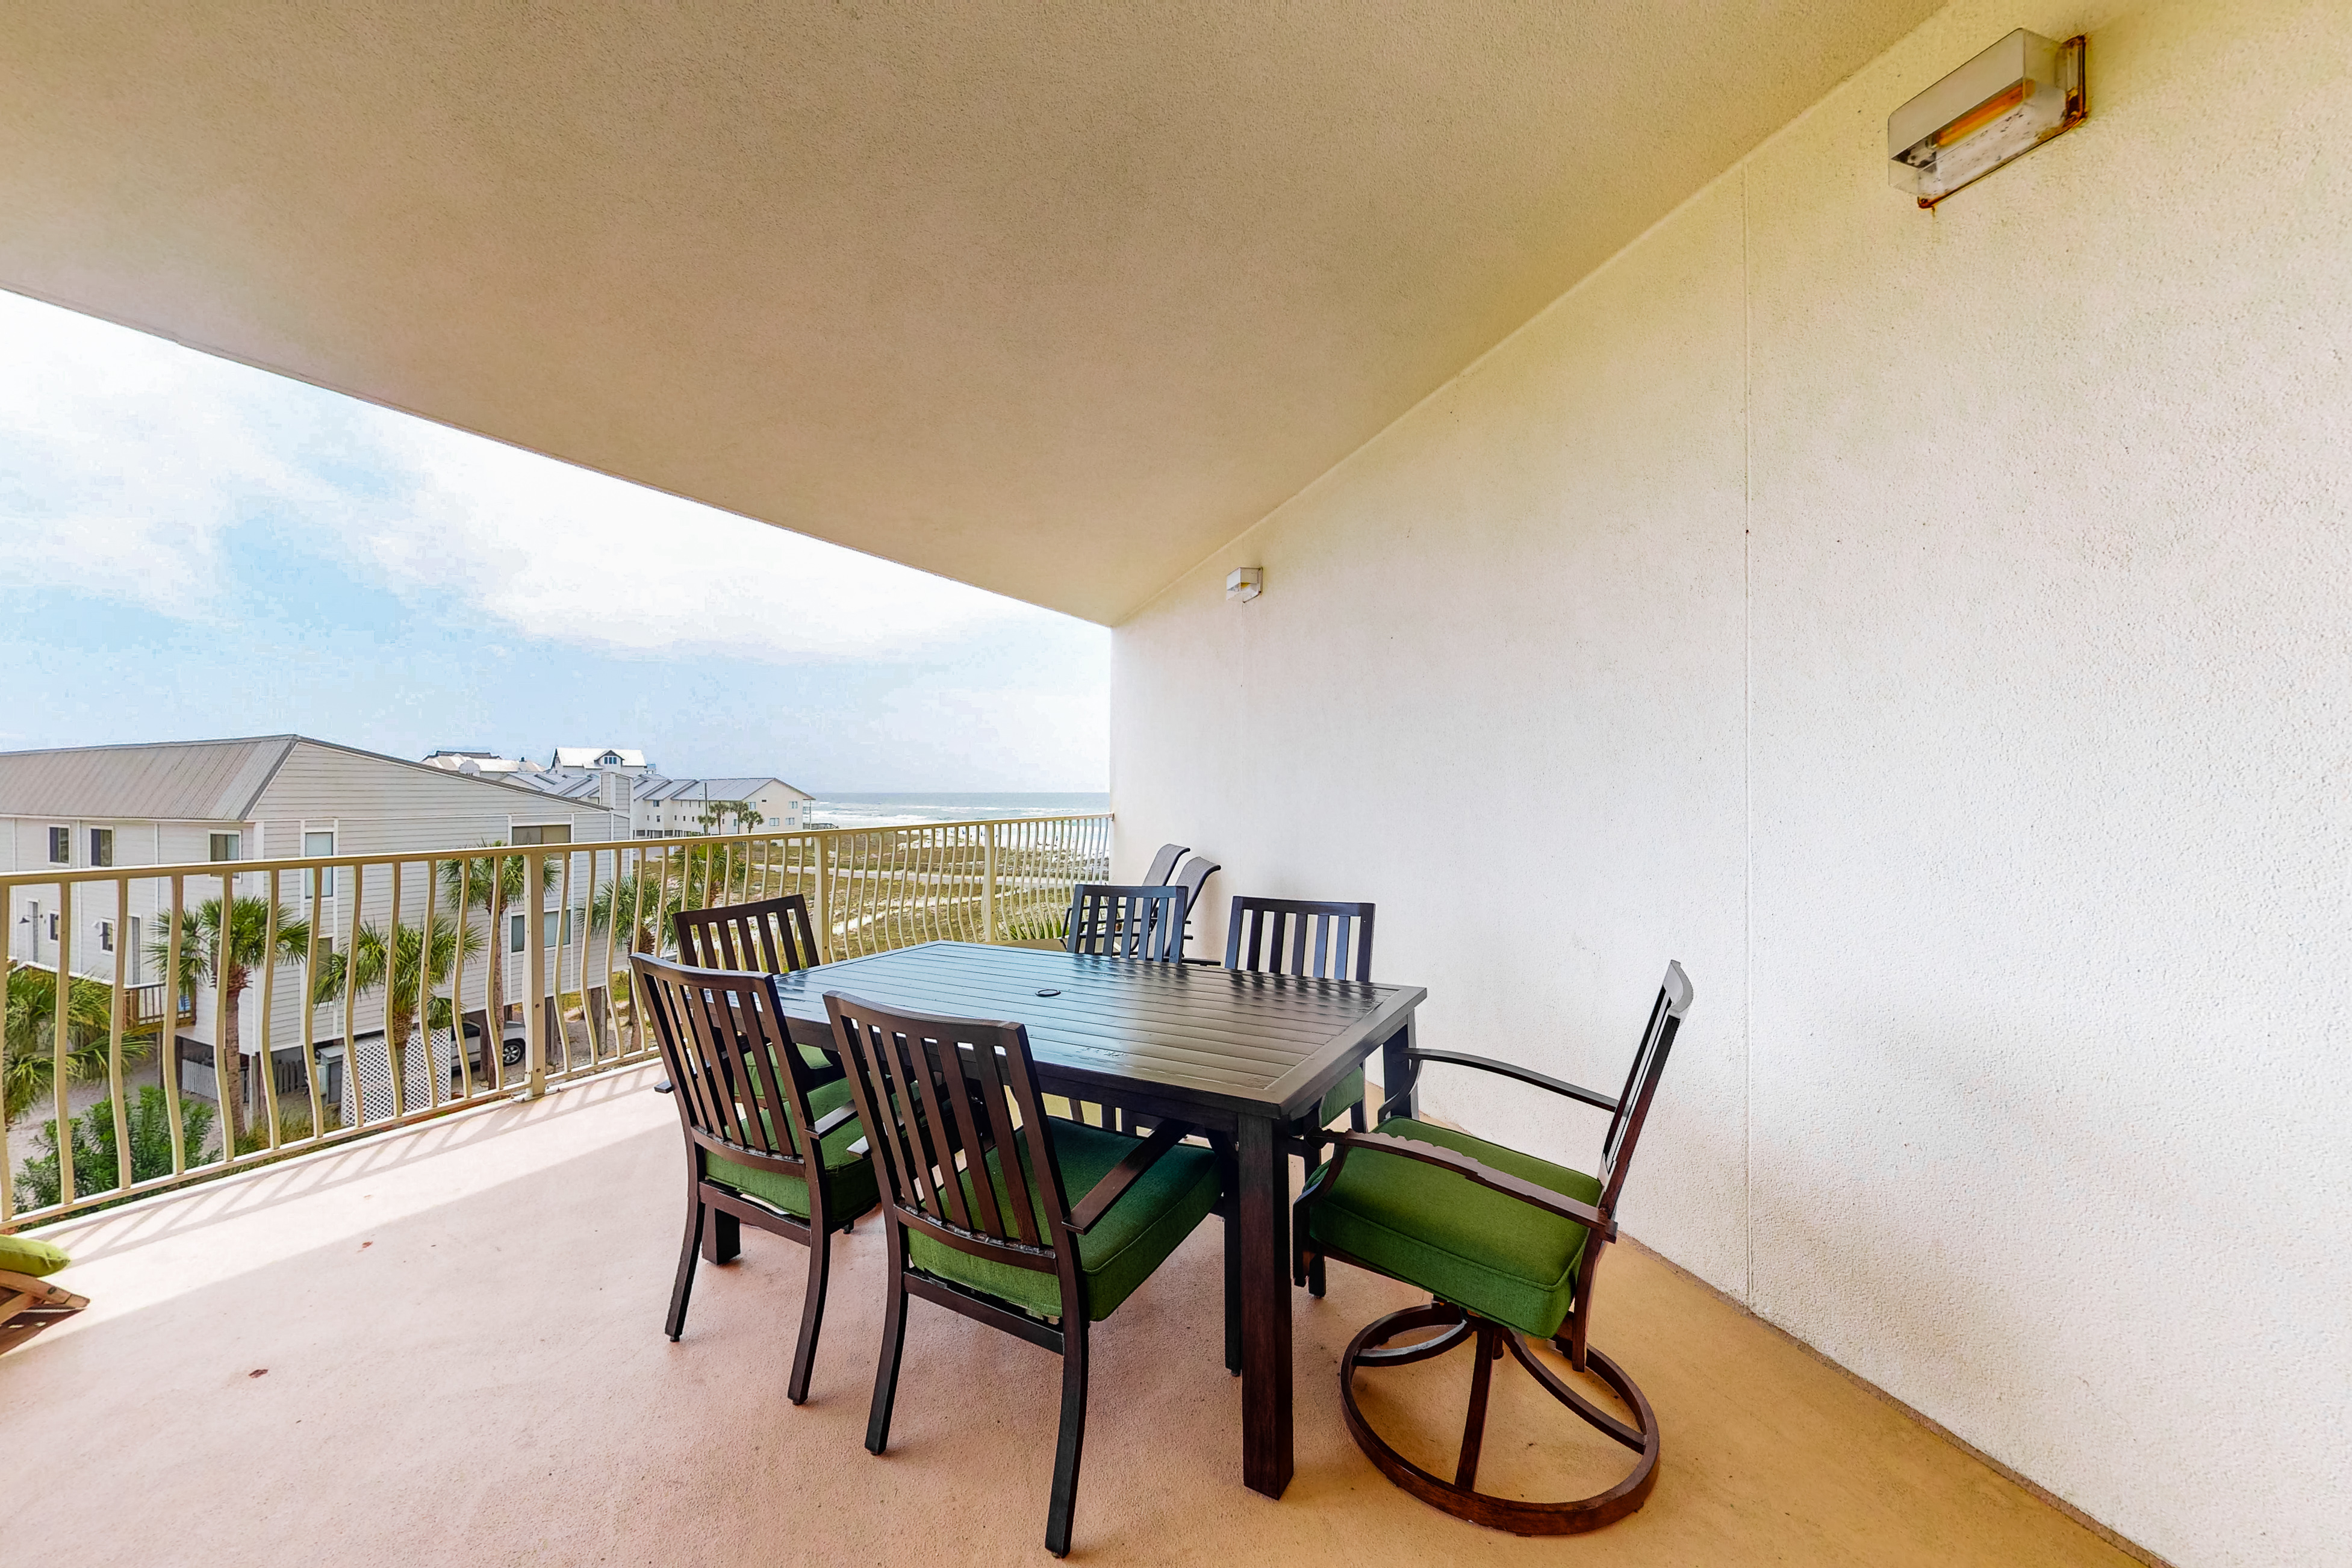 Dunes of Seagrove A303 Condo rental in Dunes of Seagrove in Highway 30-A Florida - #20